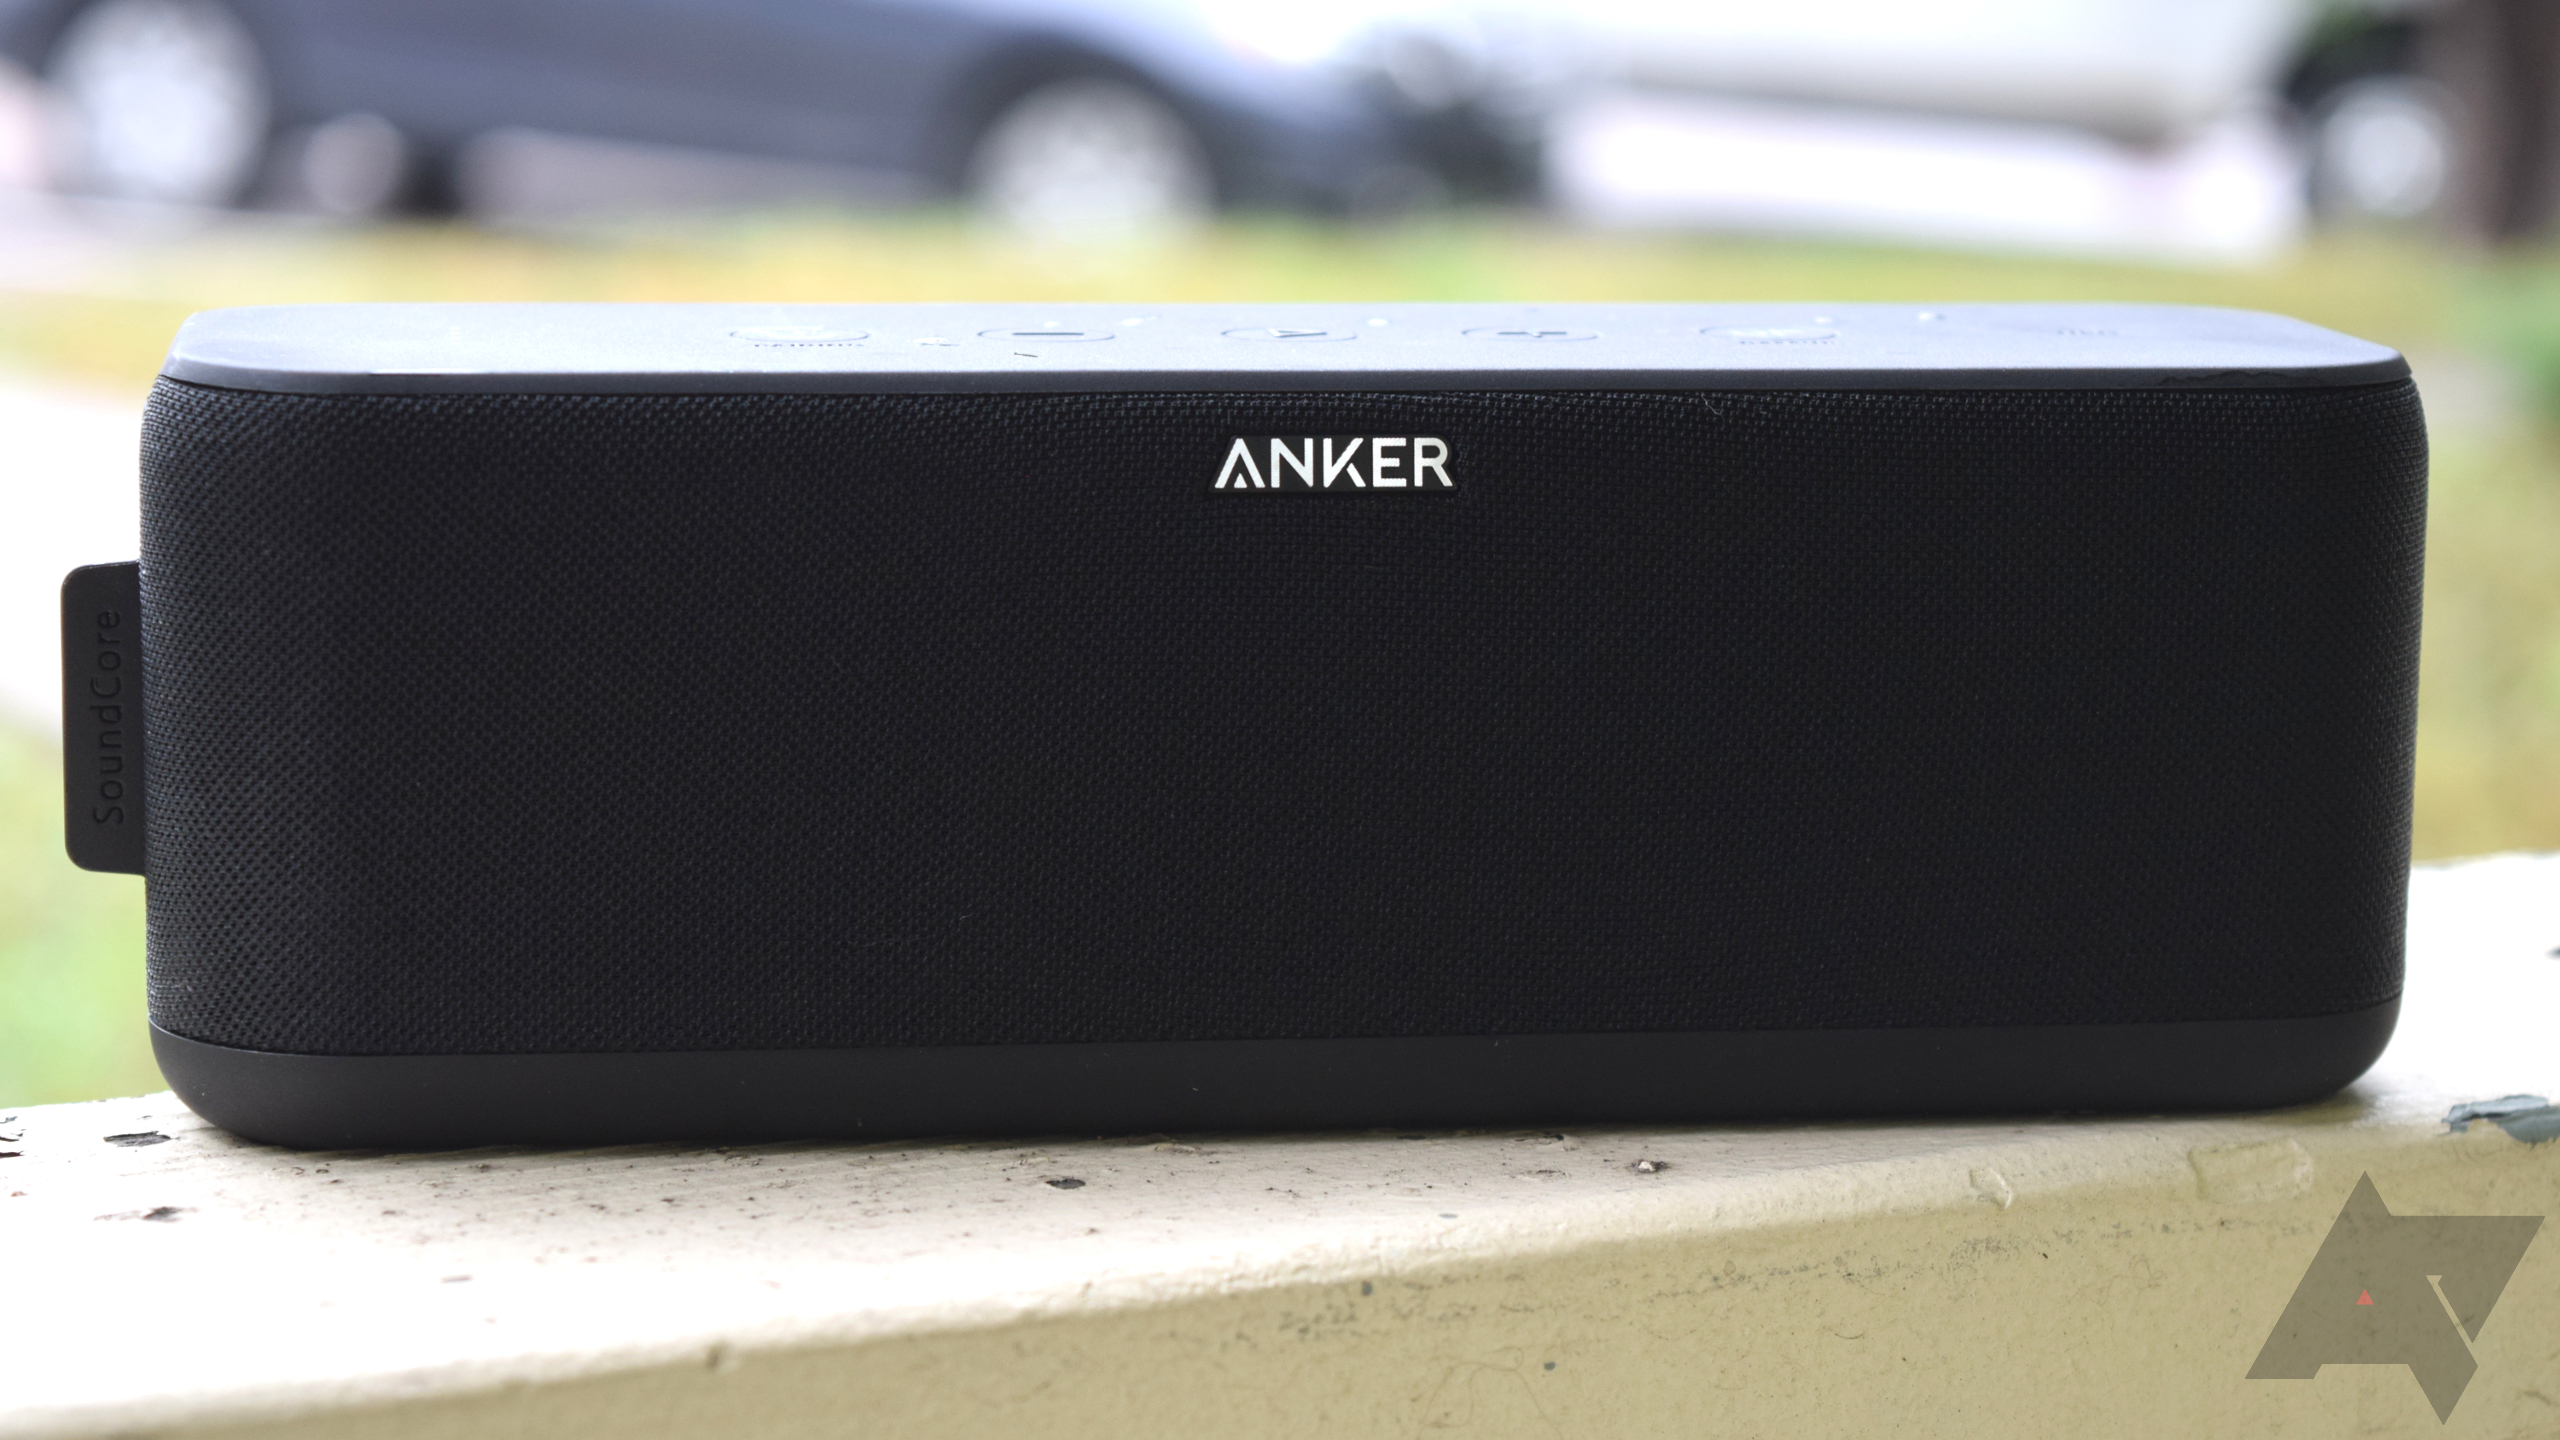 Anker SoundCore Boost Review: Big Bass for a Bargain